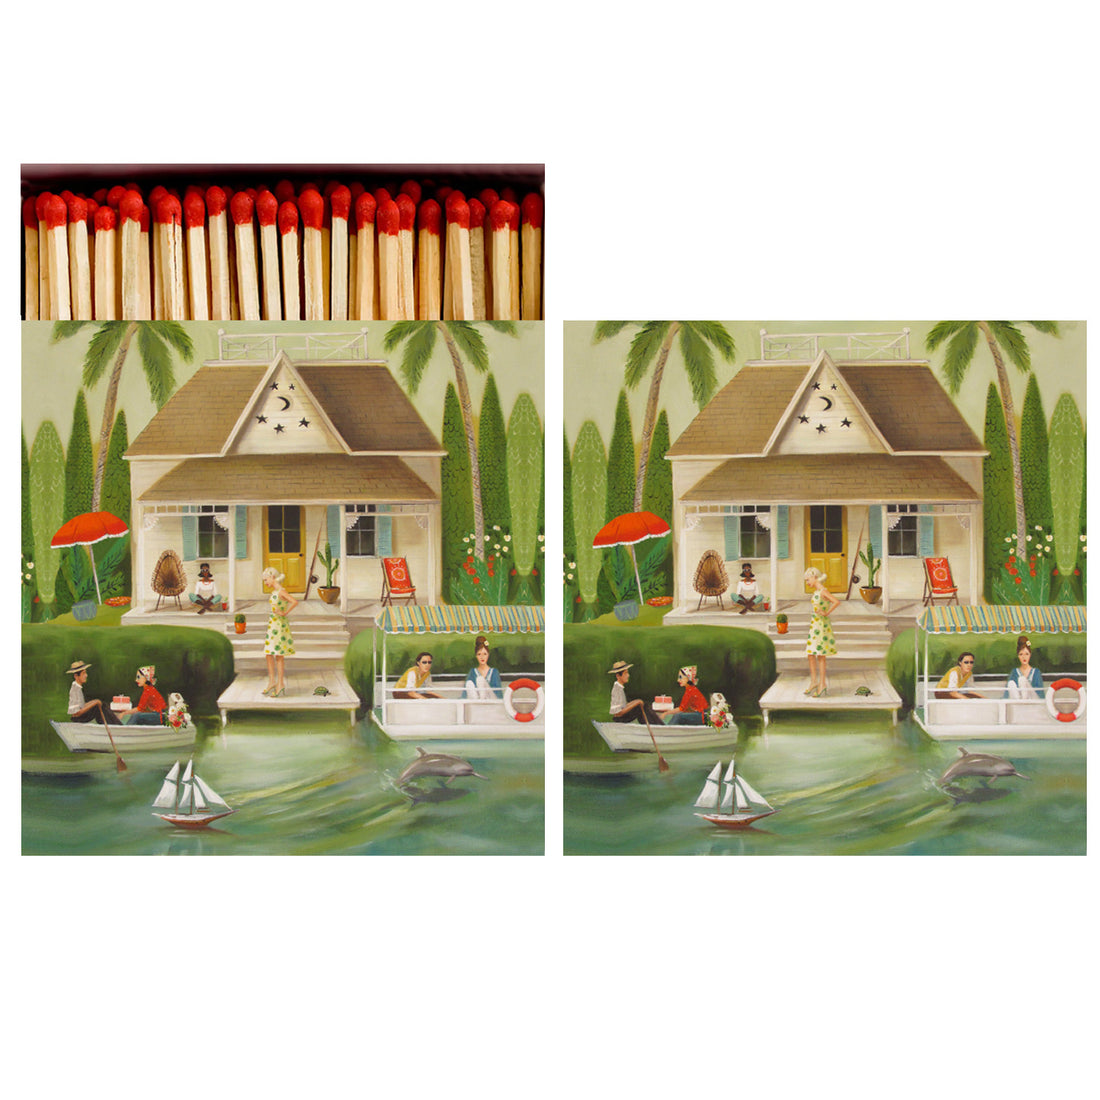 Two identical sides of a square match box, the left of which is open slightly to reveal the matches inside. The artwork on the box depicts a lake-side home with the water in the foreground and trees in the background, where several people enjoy themselves in the scene.